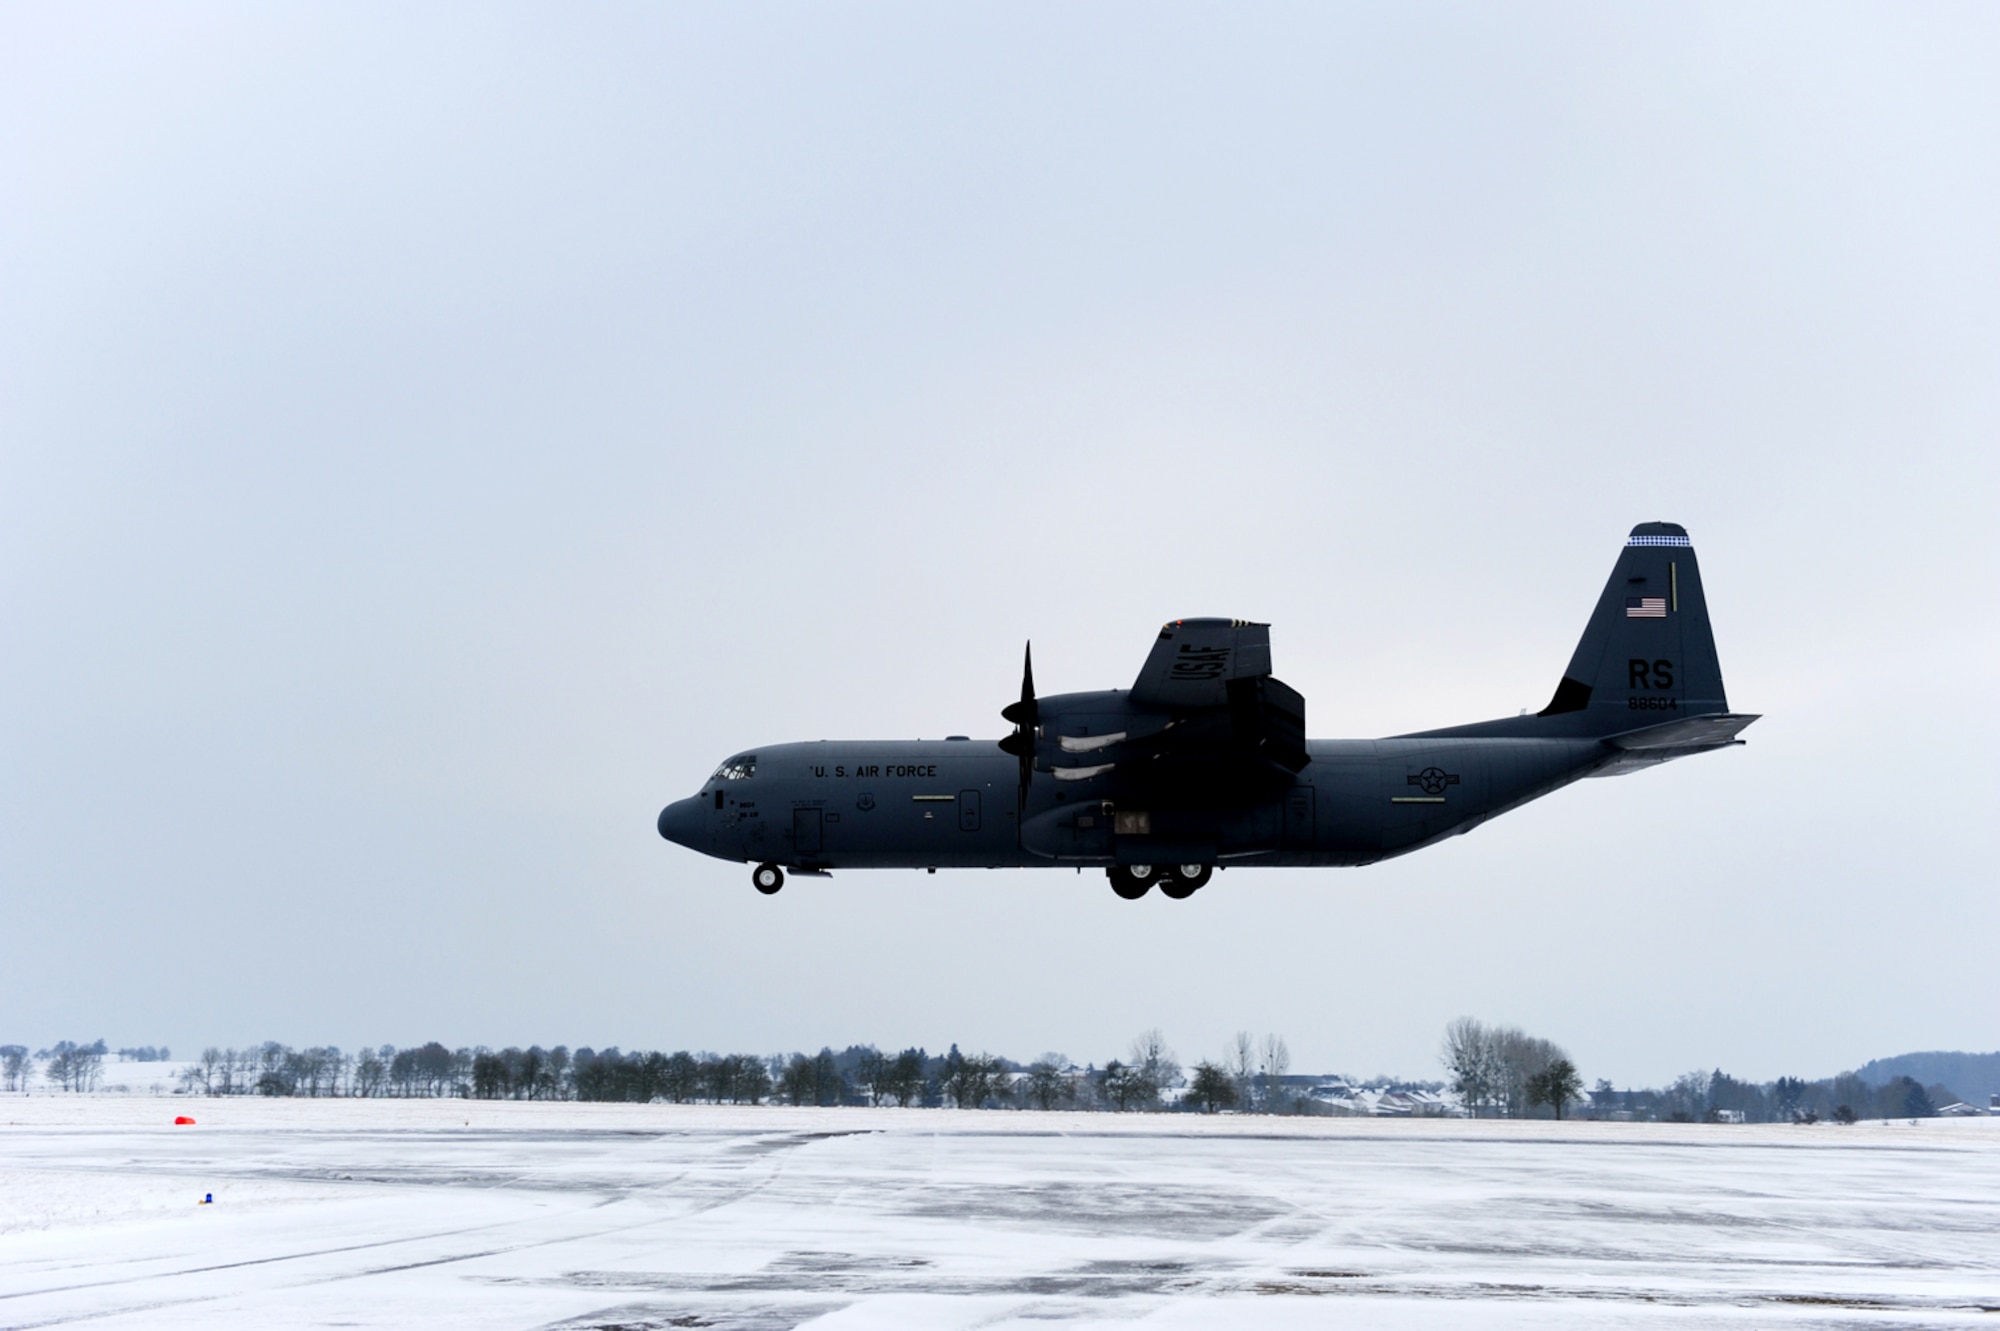 A U.S. Air Force C-130 Hercules carrying military members and cargo from Ramstein Air Base, Germany, prepares to land at Flugplatz Bitburg, Germany, Jan. 26, 2010, in preparation of Ramstein's operational readiness inspection in September. The units are setting up bare-base operations as part of the dual-wing operational readiness exercise with the 86th Airlift Wing. This is the second of five operational readiness exercises. (U.S. Air Force photo by Staff Sgt. Sarayuth Pinthong)